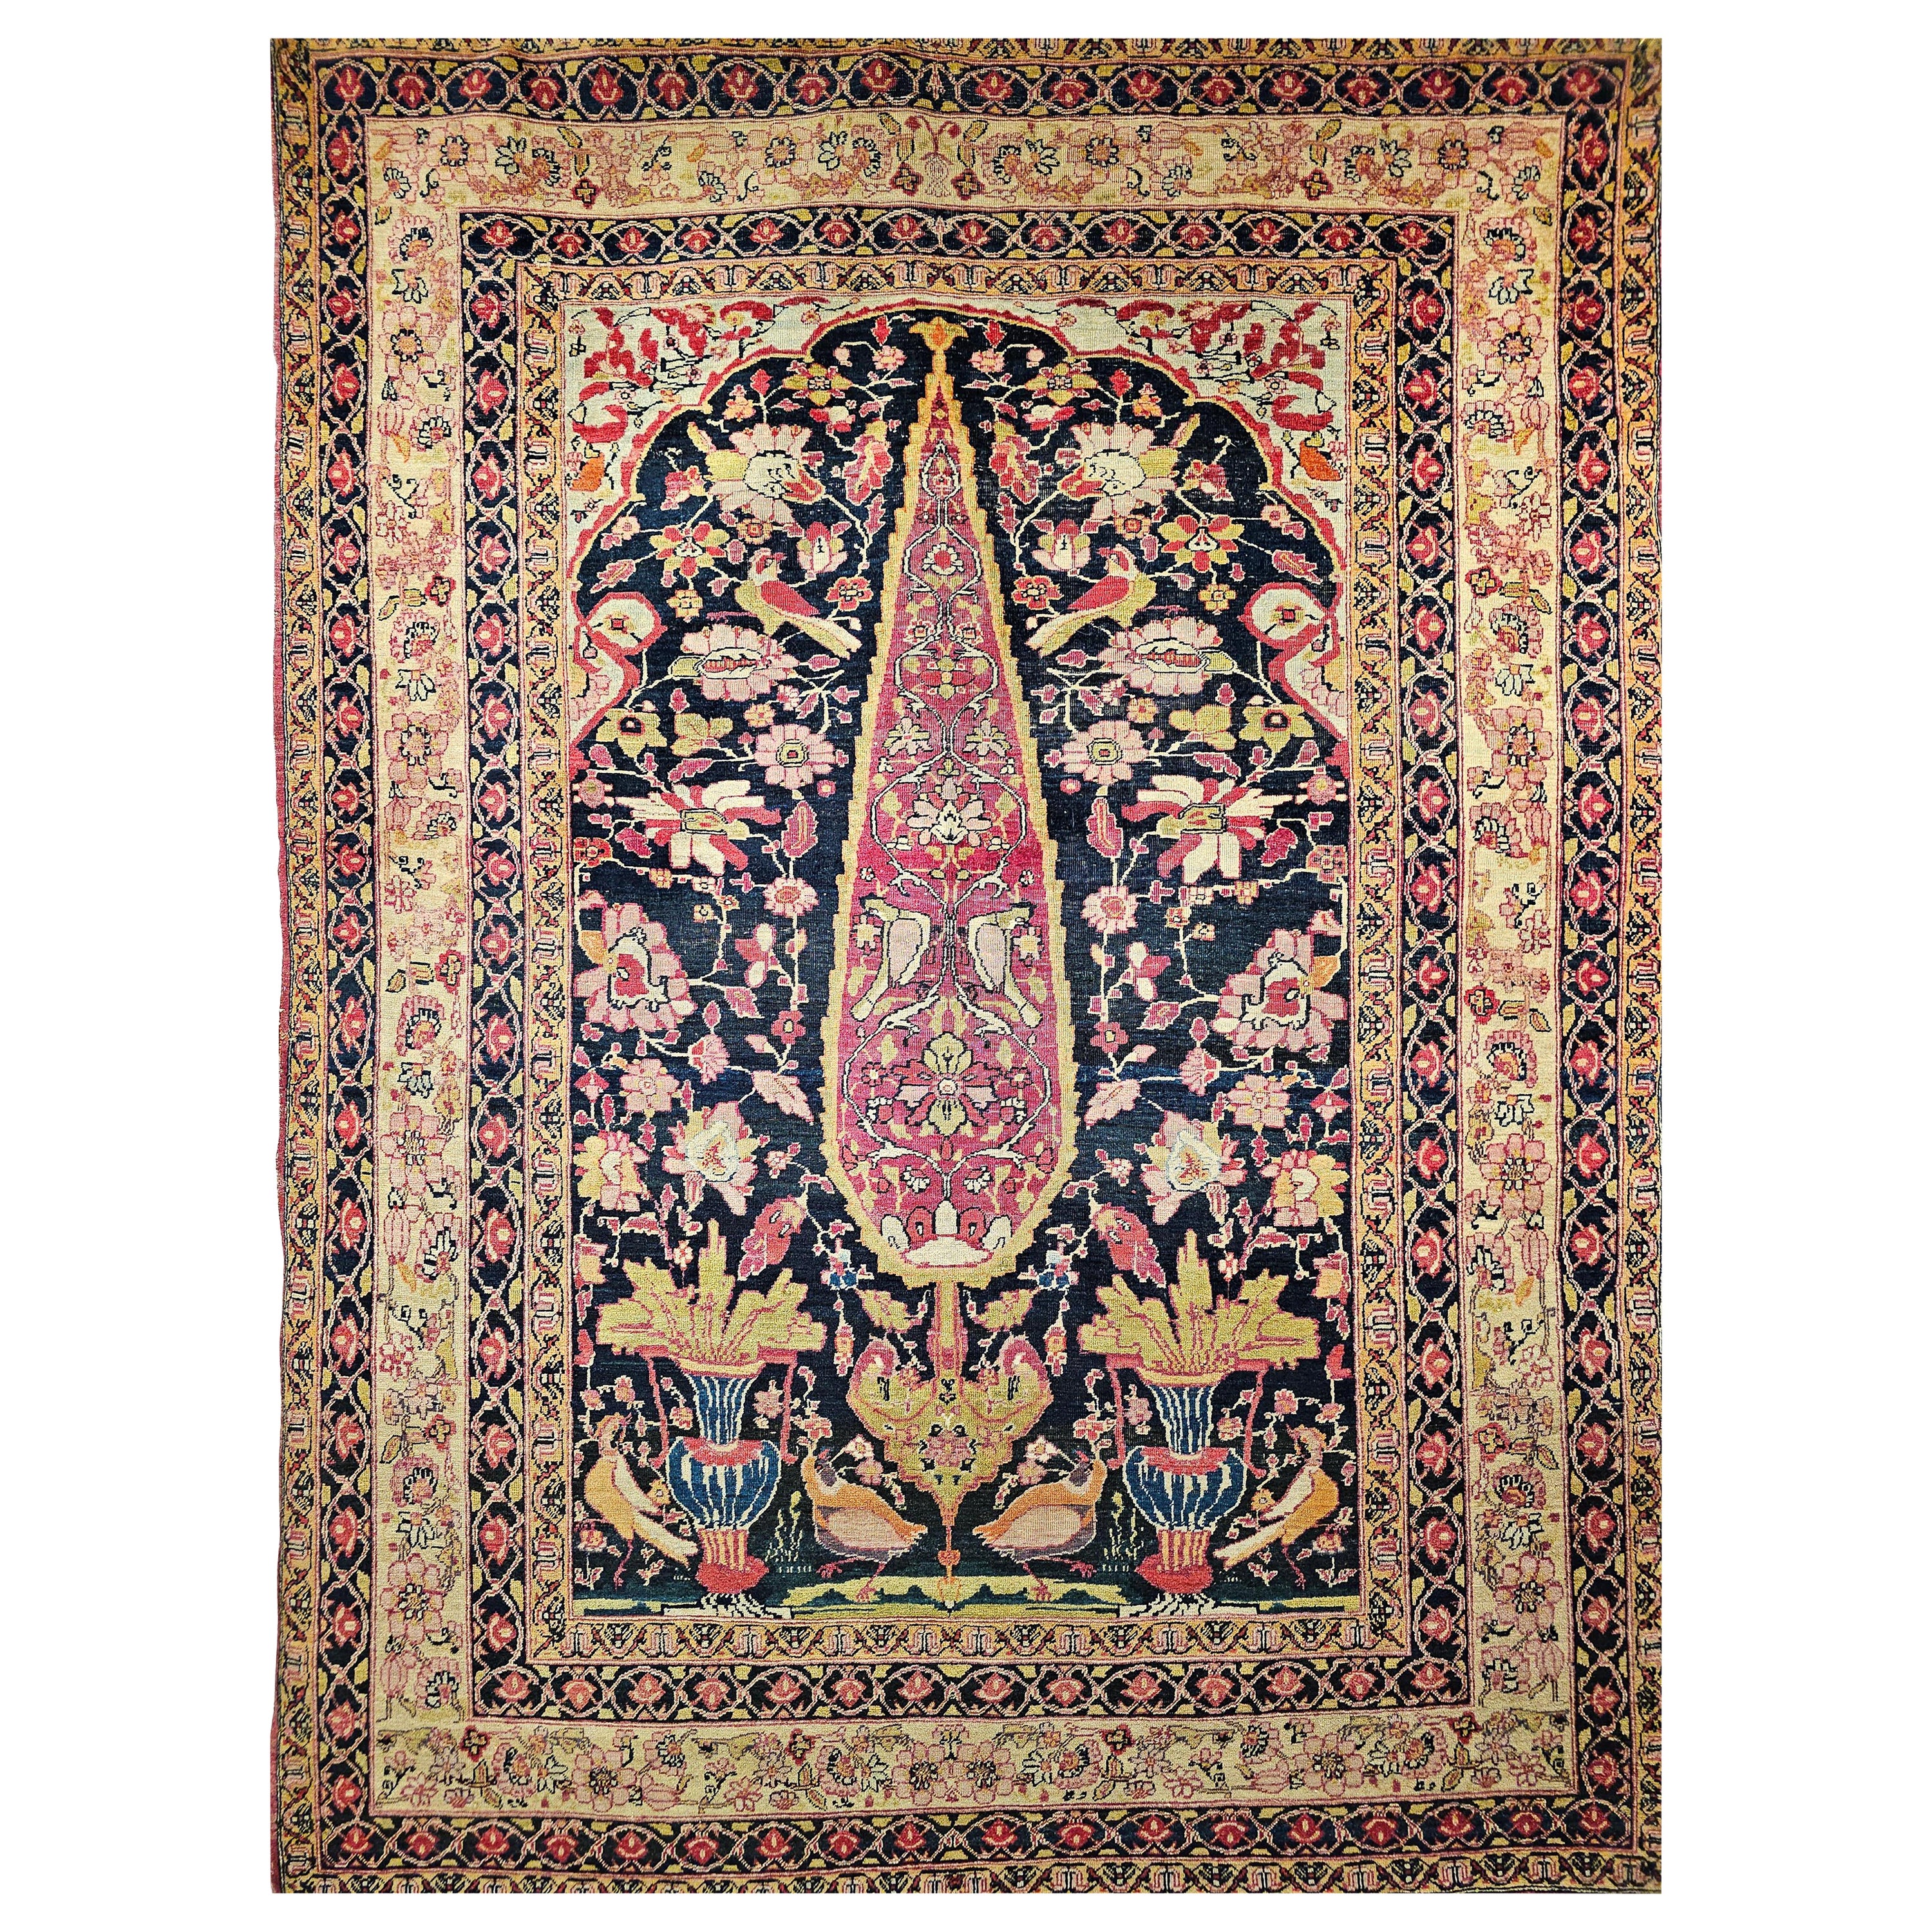 19th Century Persian Kerman Lavar Area Rug in the “Tree of Life” Pattern For Sale